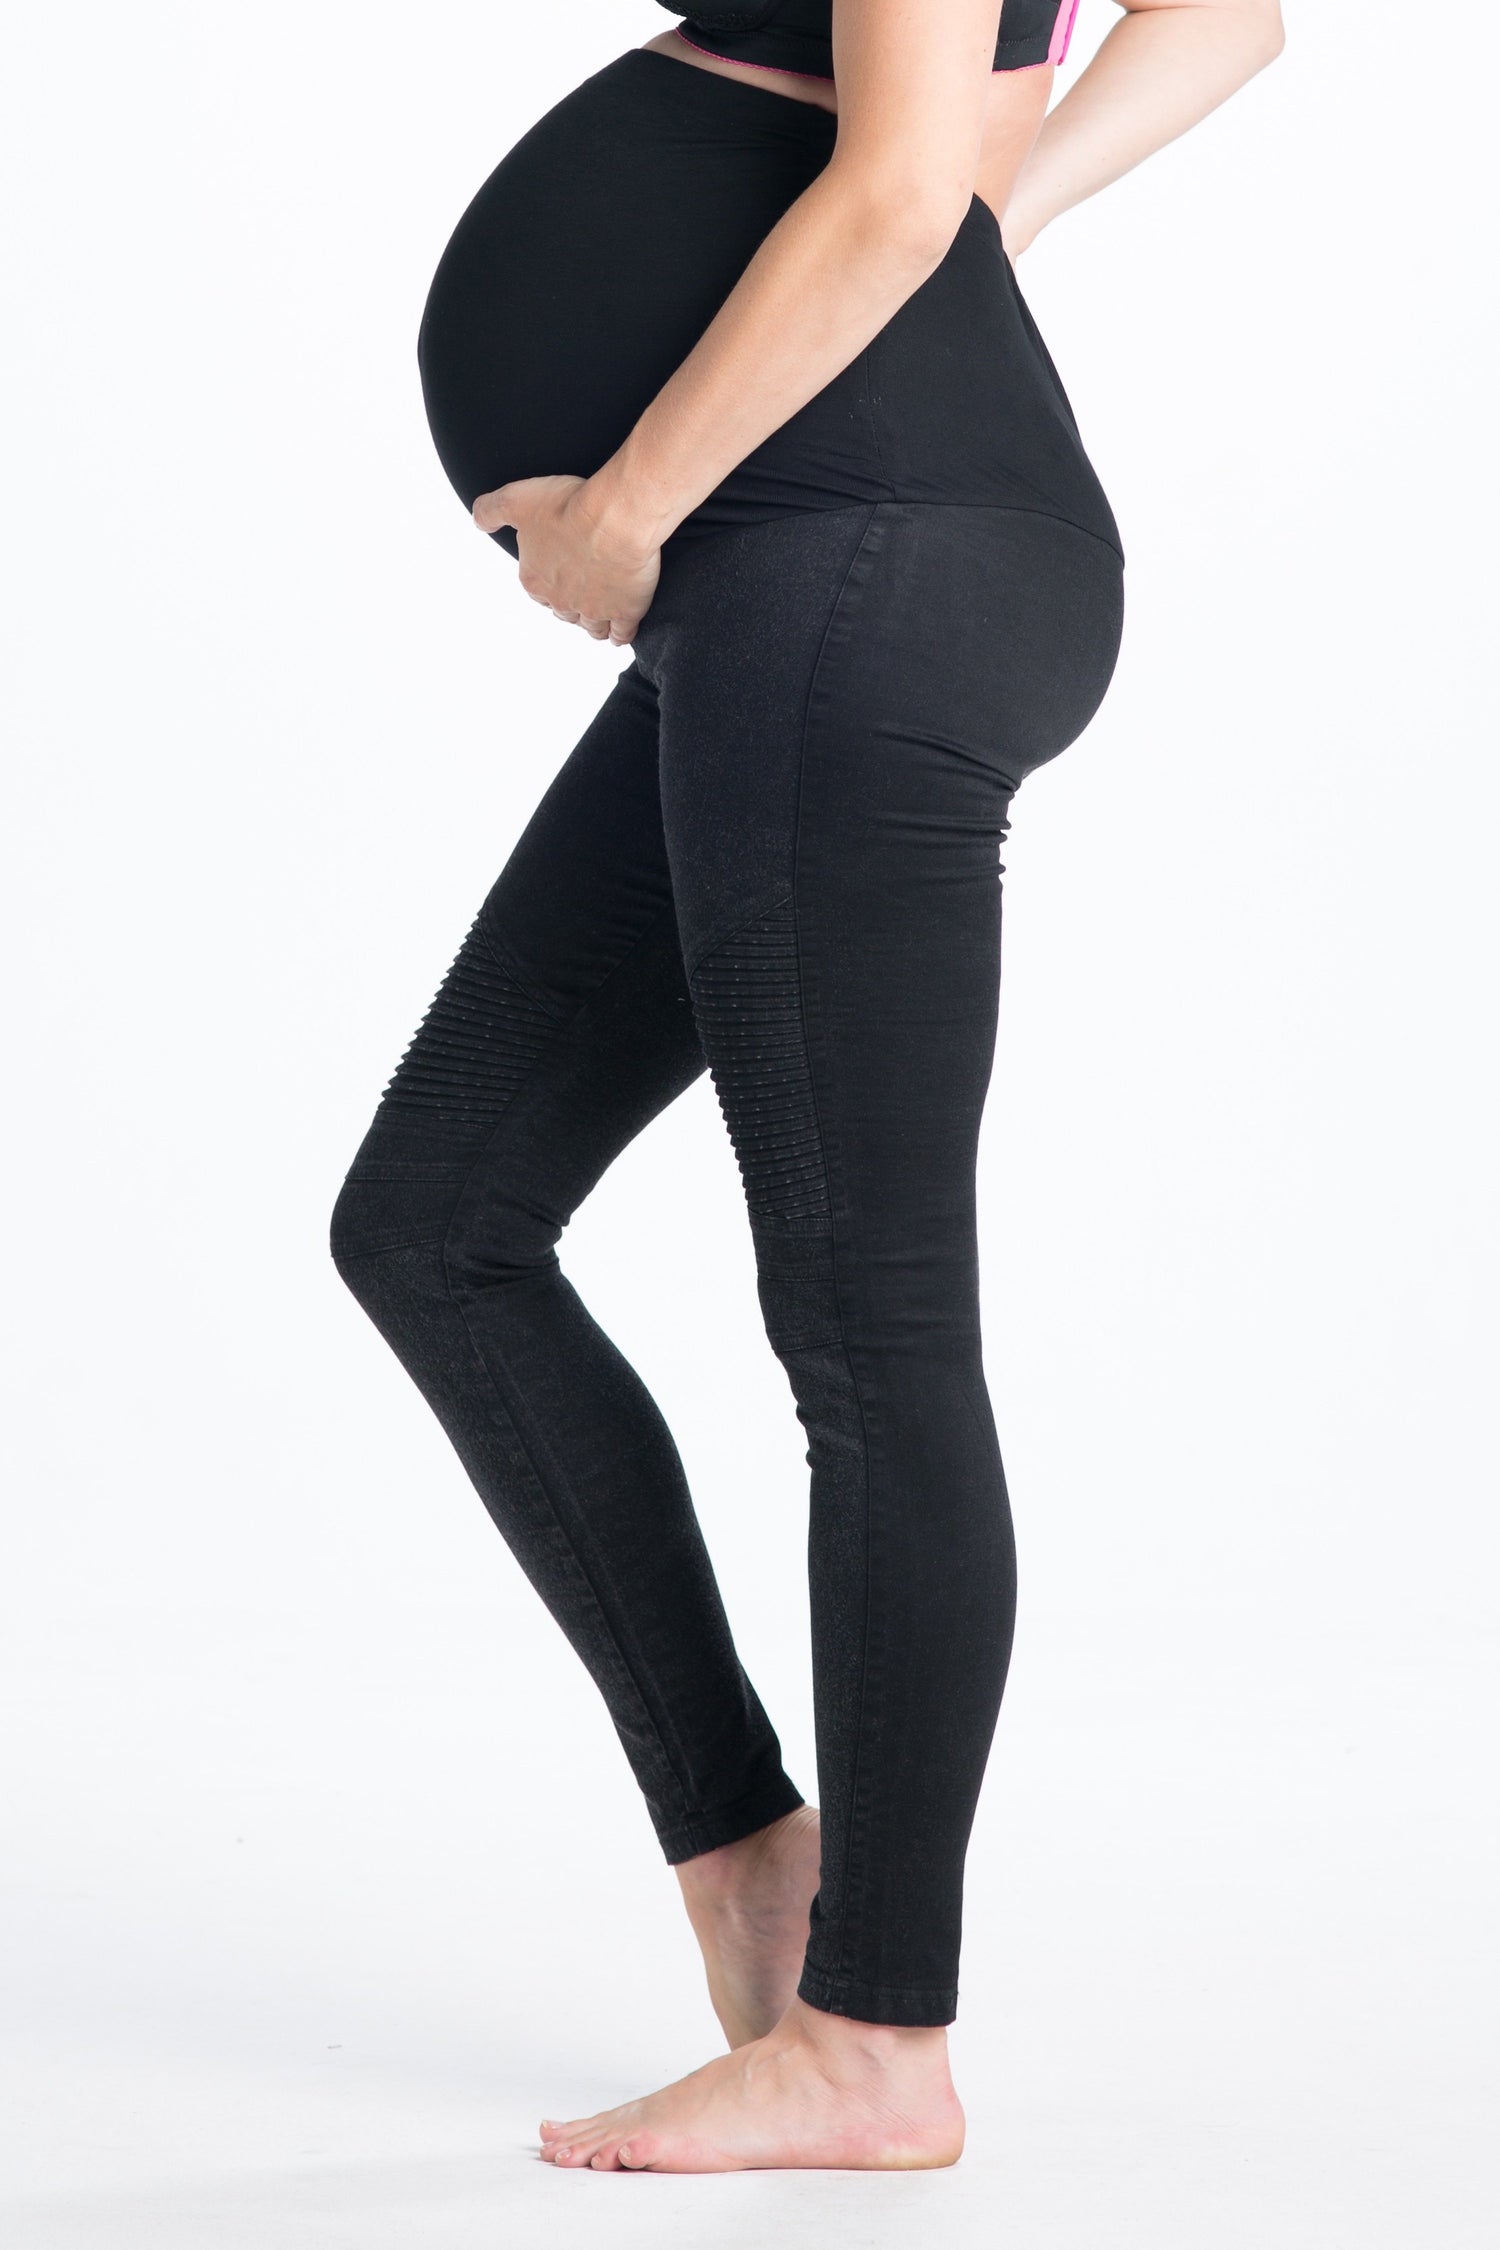 Ripe Organic Cotton Essential Under-Belly Maternity Leggings in Black by  Ripe Maternity